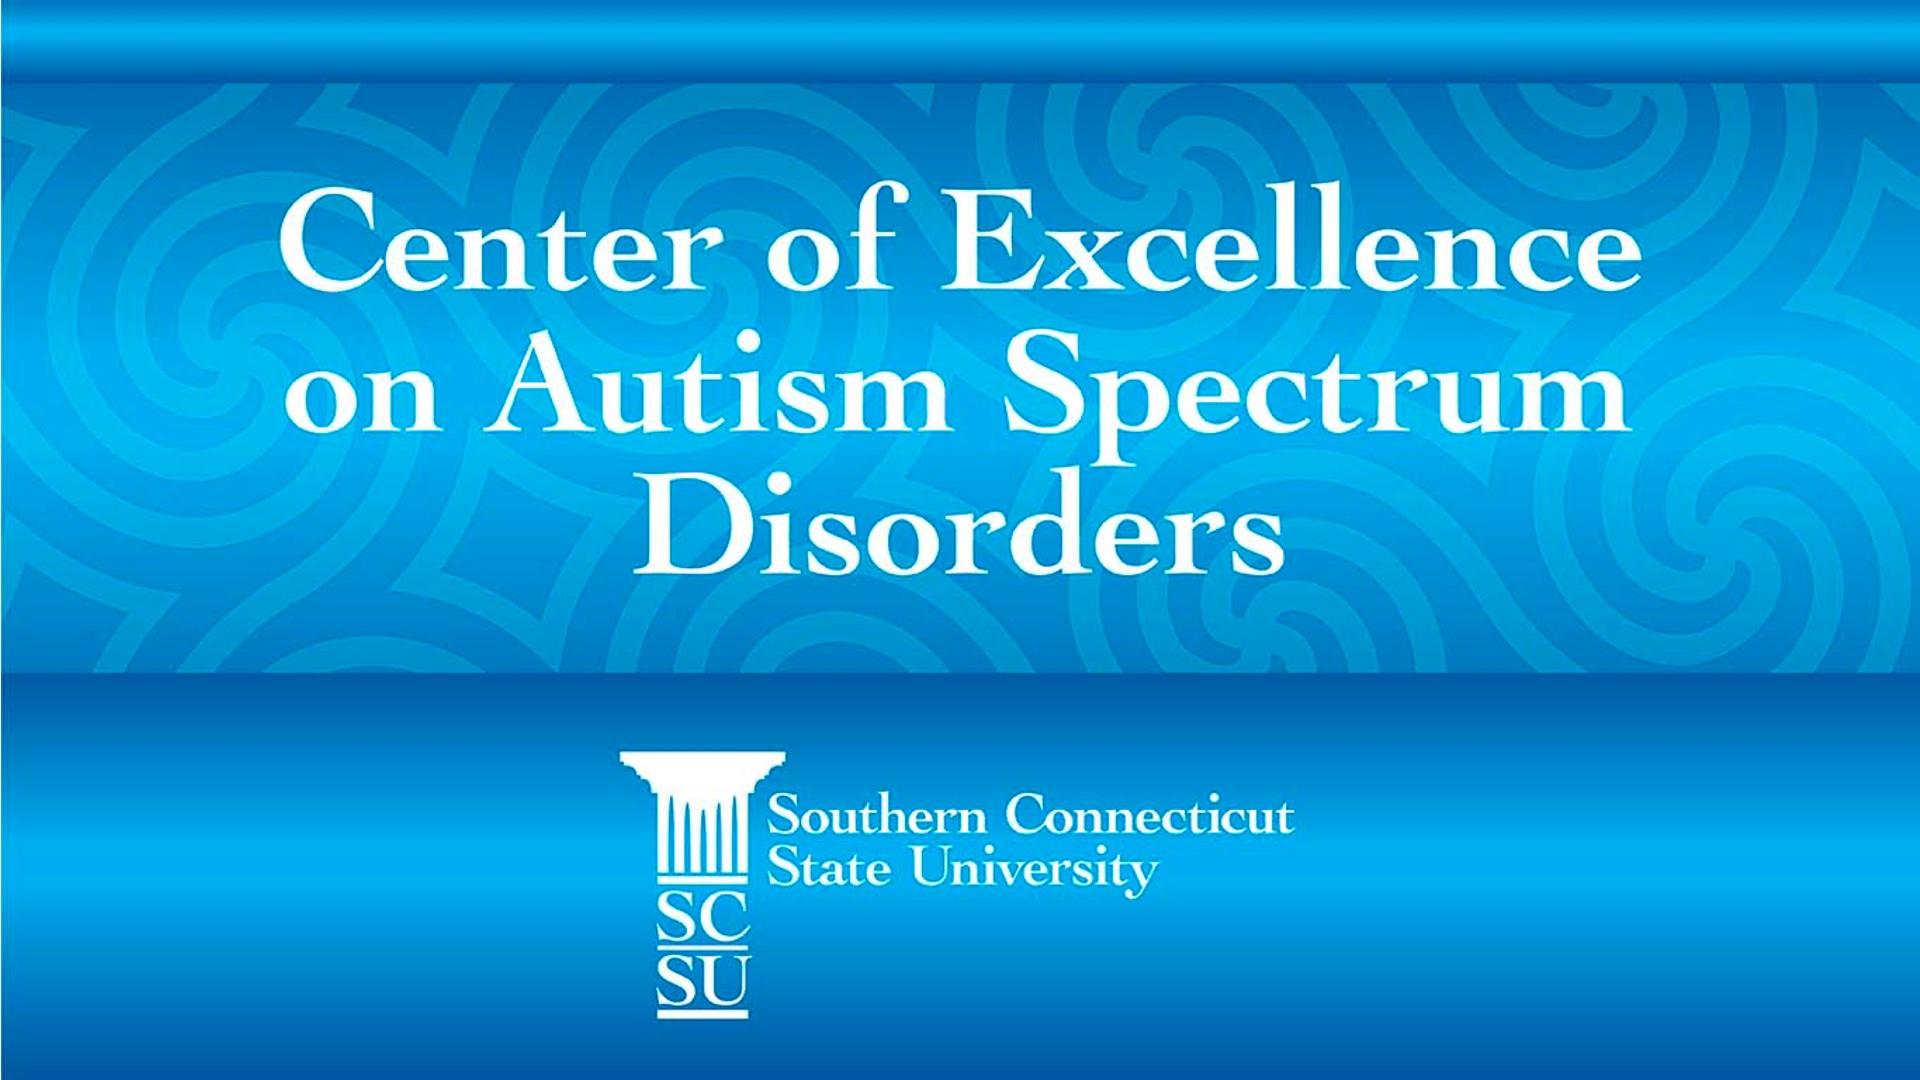 decorative image of a slide with blue background and the words Center of Excellence on Autism Spectrum Disorders Southern Connecticut State University